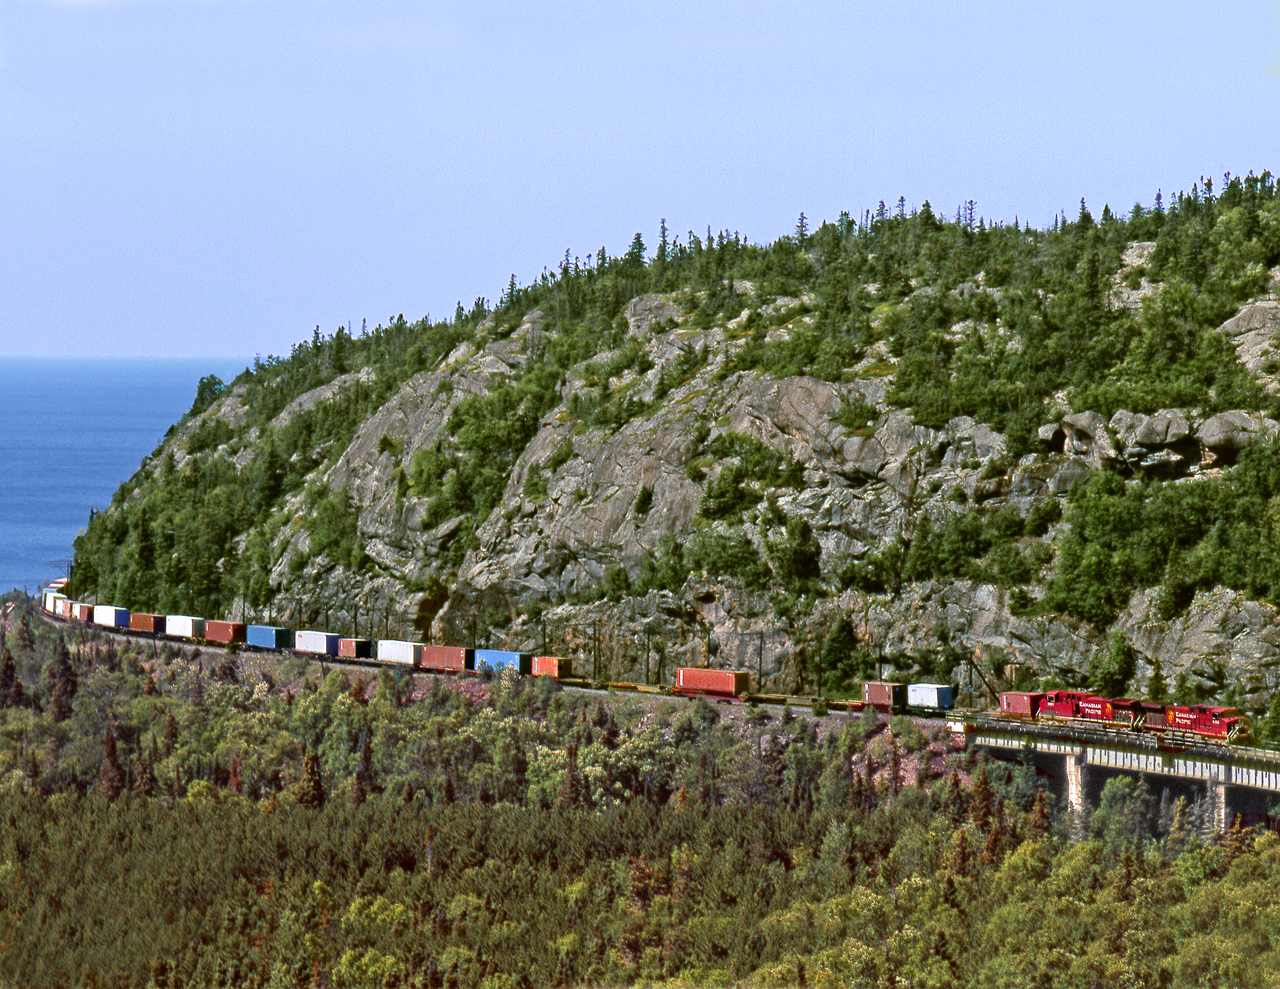 Eastbound container train approaches the Little Pic River bridge on Lake Superior's north Shore in Neys Provincial Park